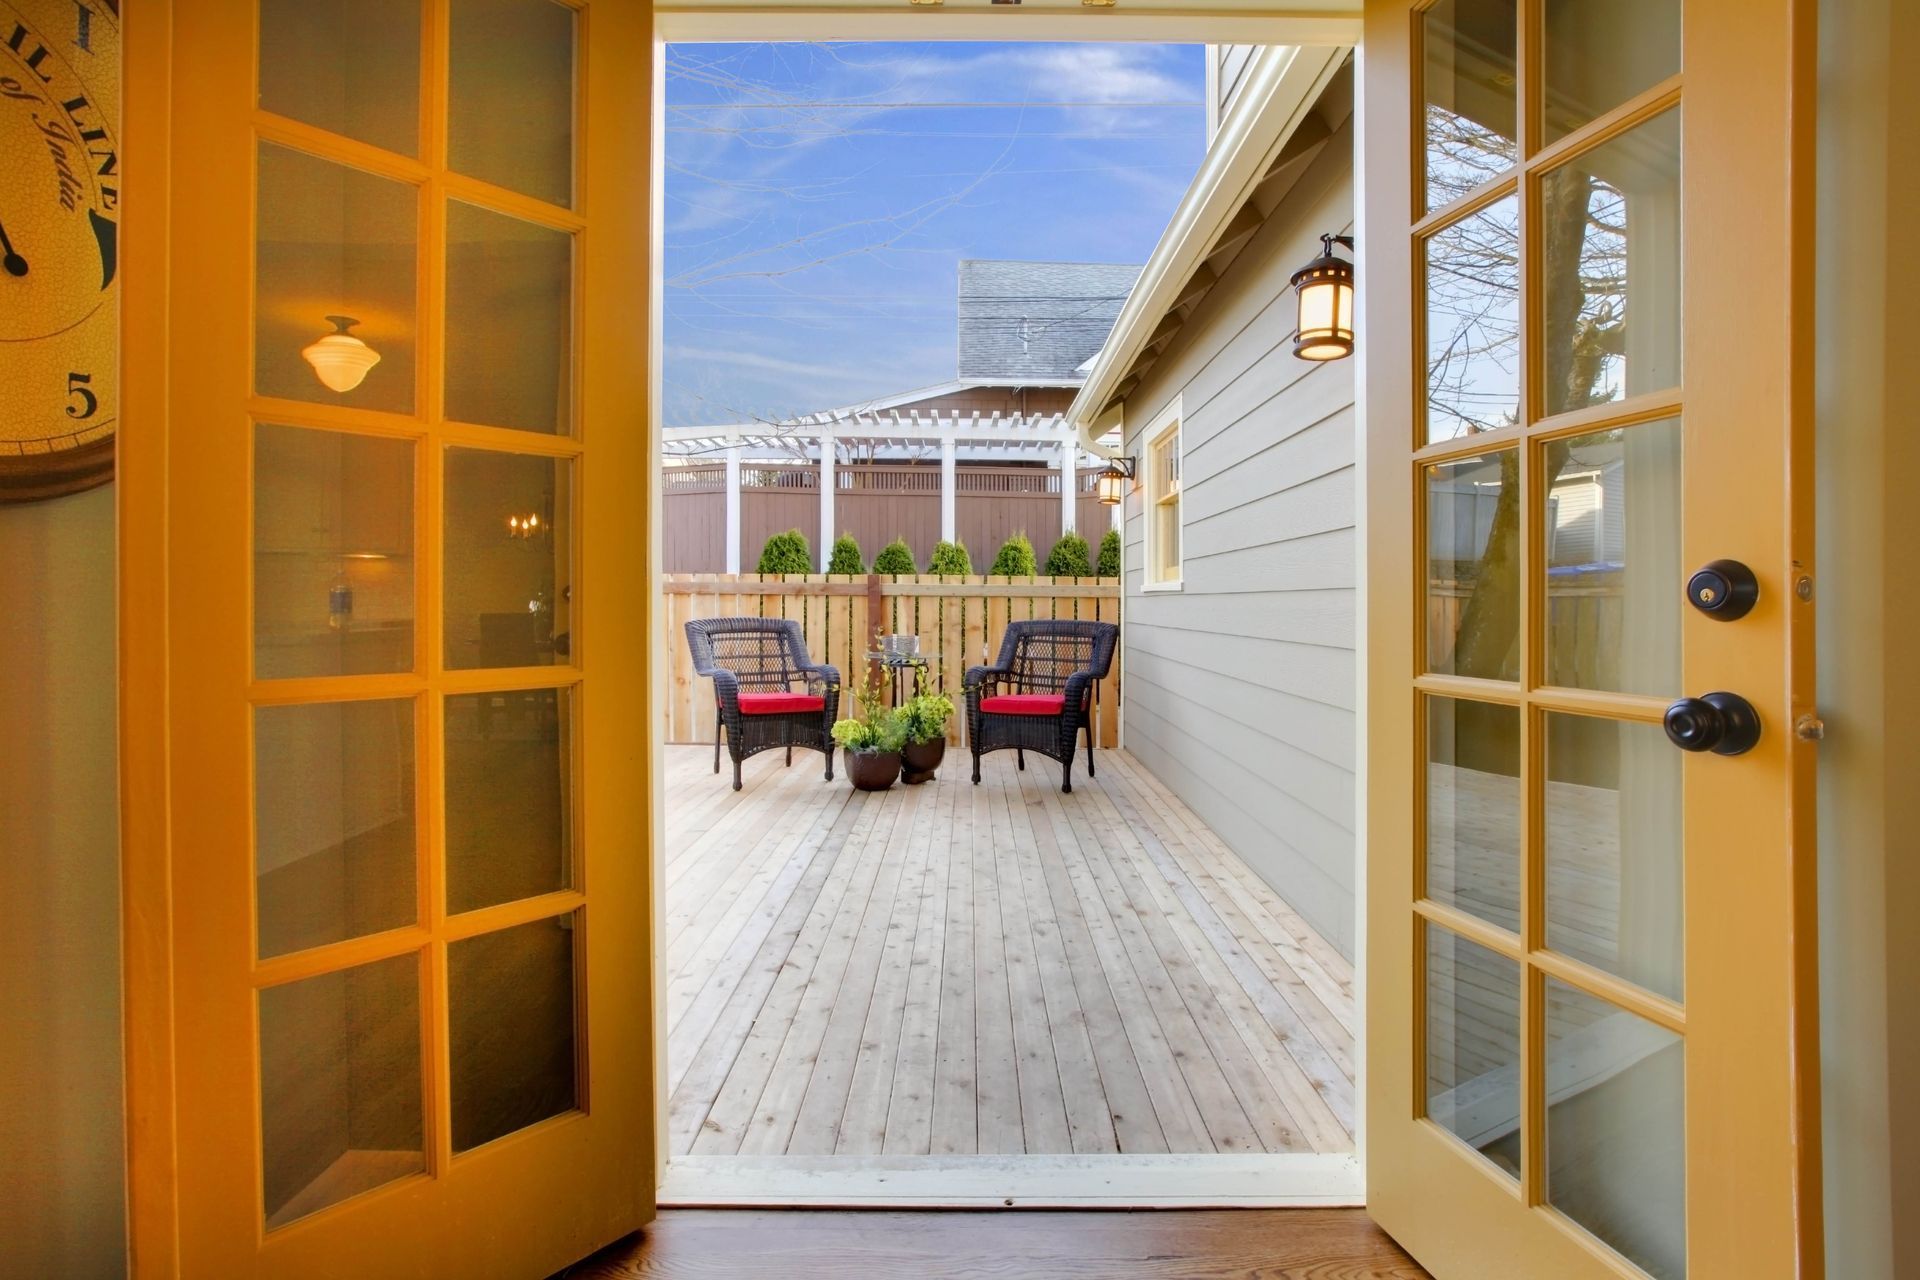 the french doors are open to a wooden deck with chairs and potted plants .